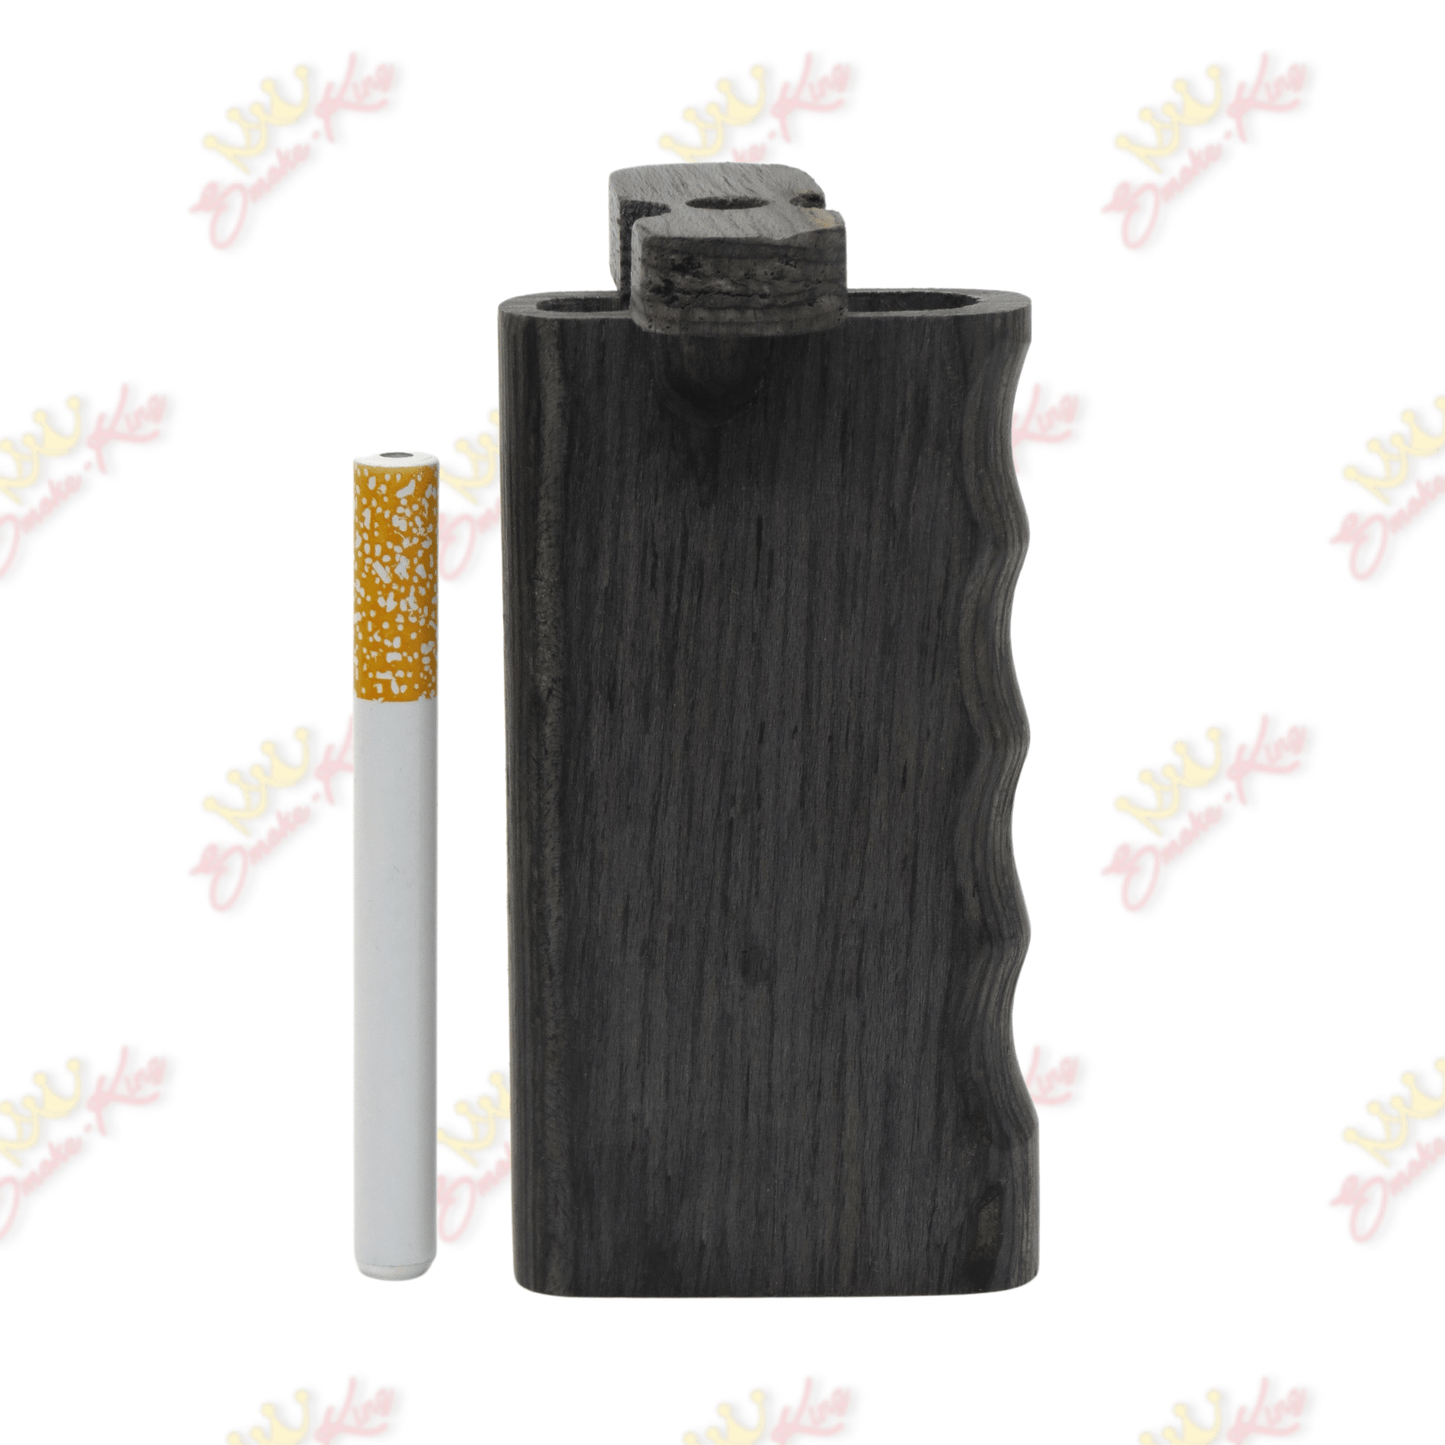 Grey wood dugout one hitter